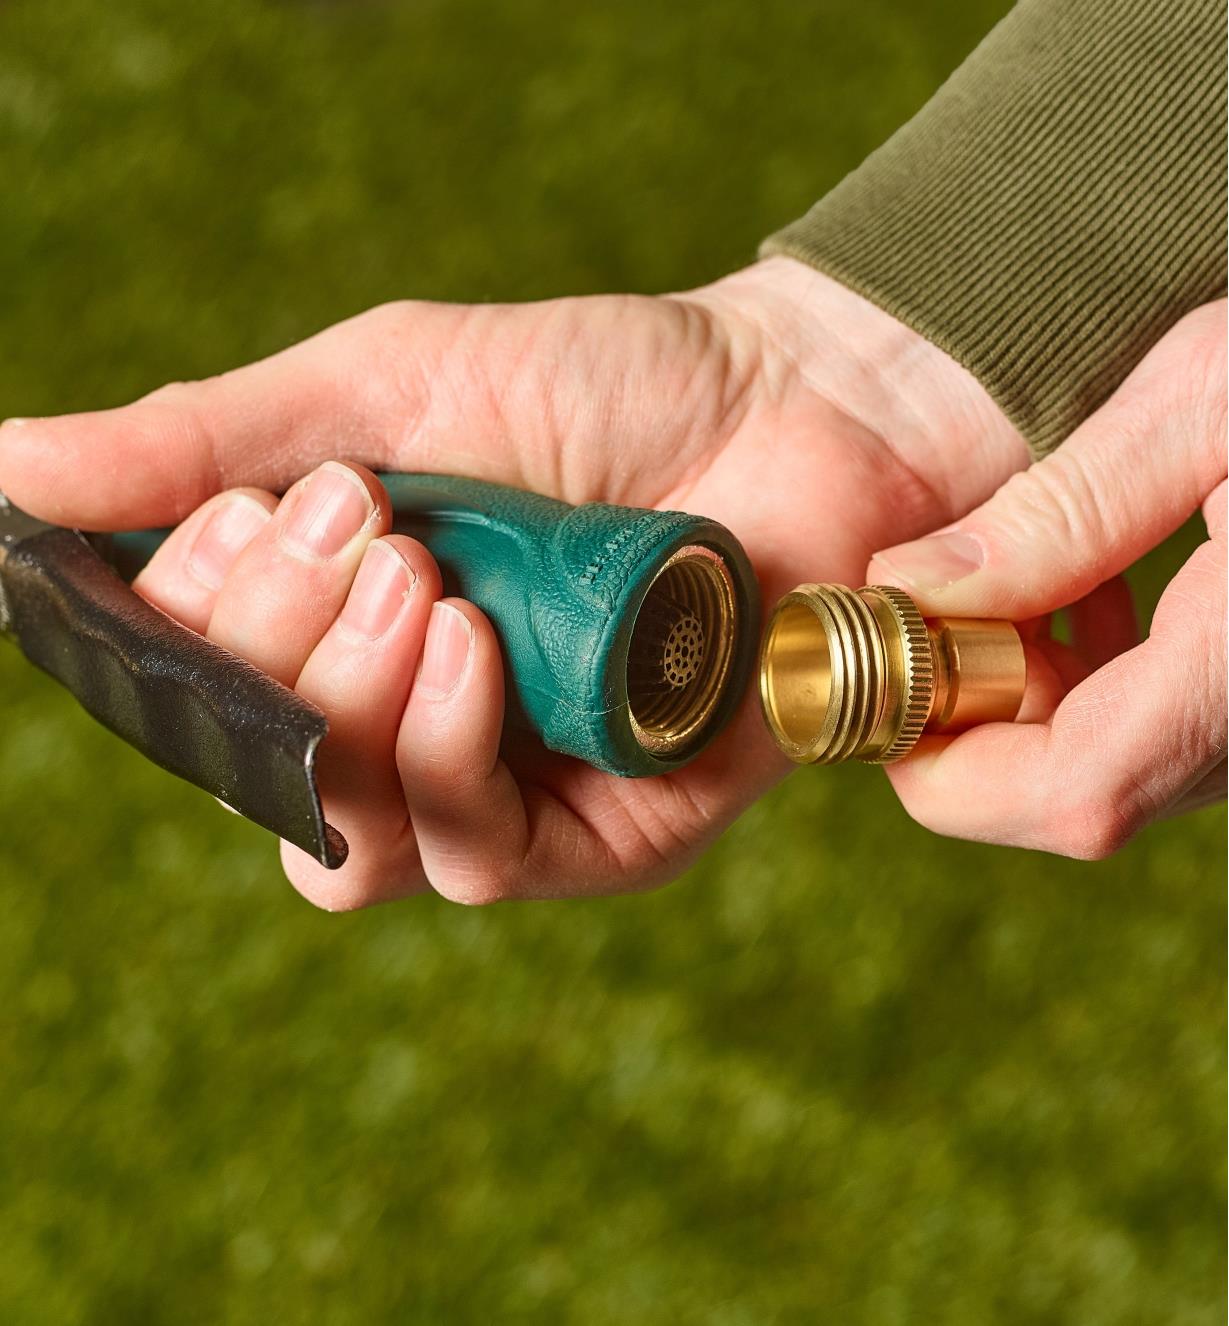 A gardener holds a nozzle in one hand with a male tool adapter in the other